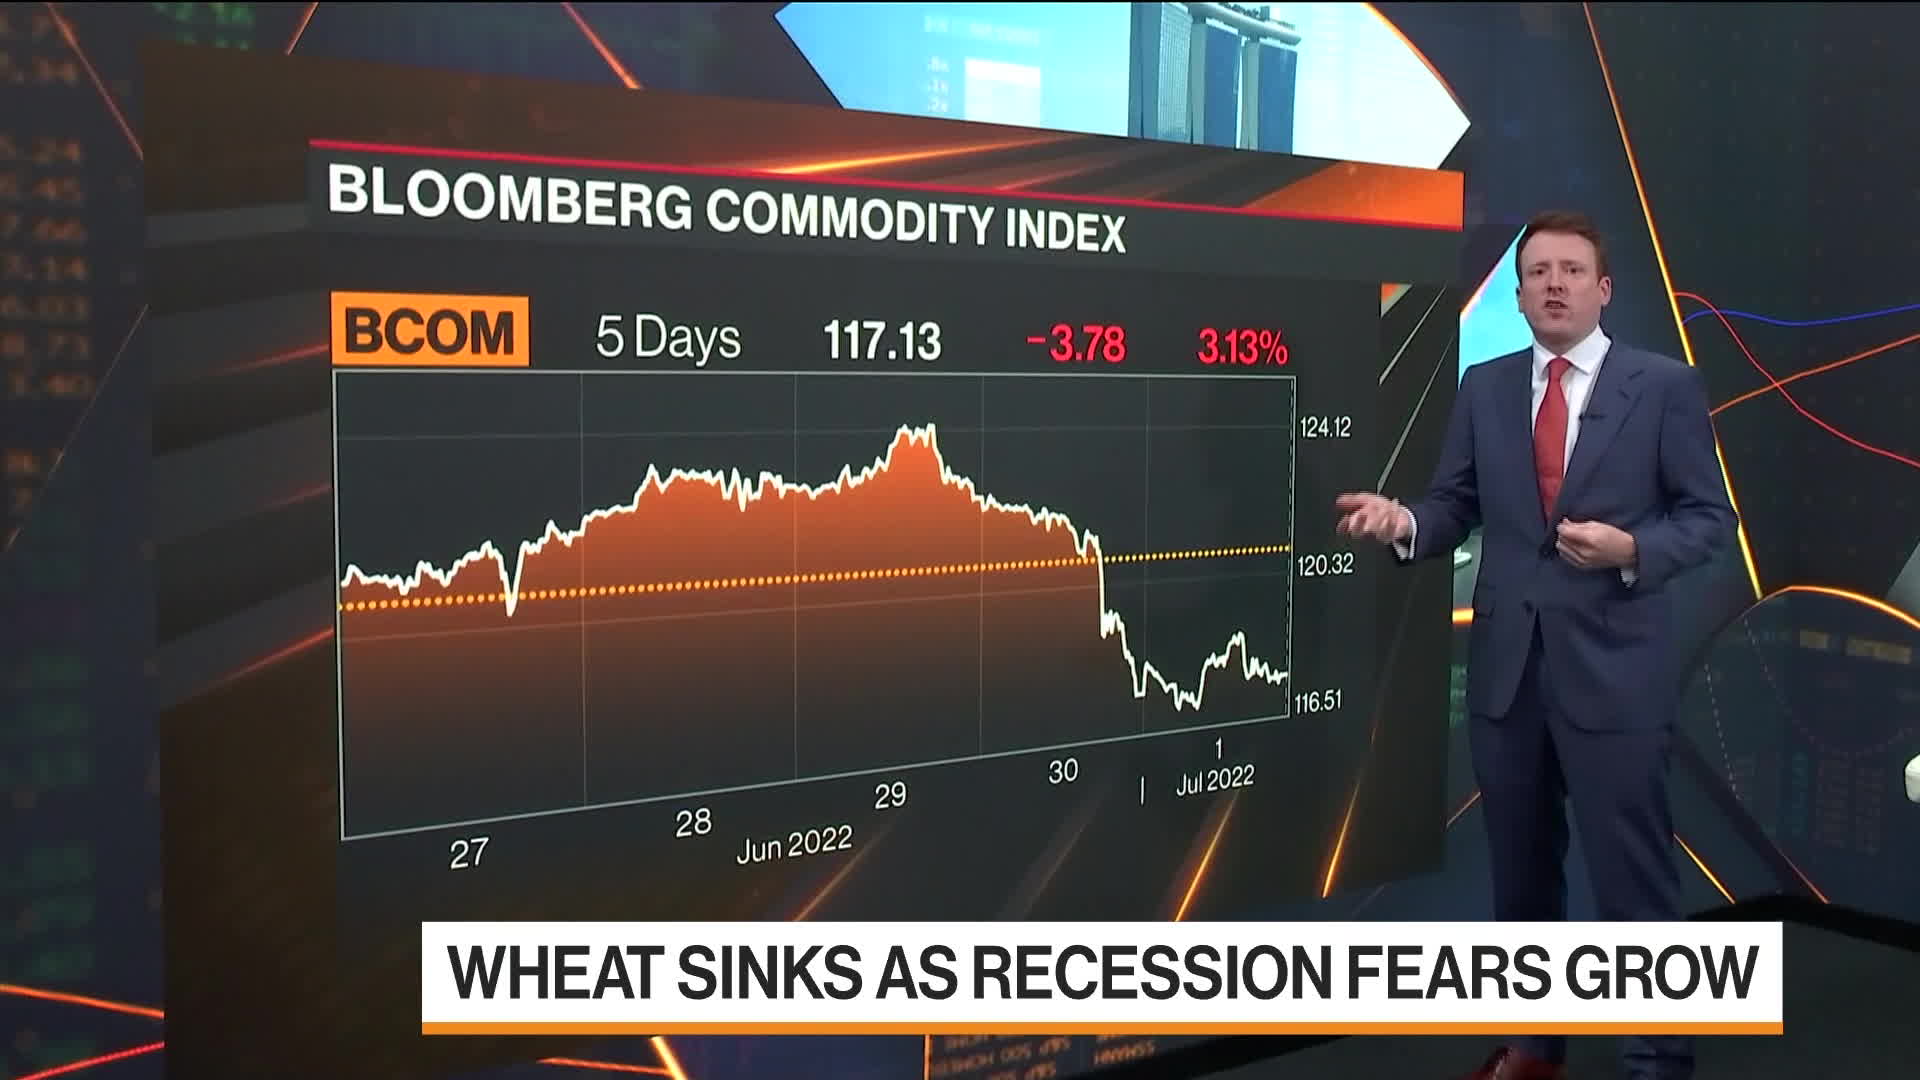 European Equities, Wheat Prices, Iron Ore: 3-Minute MLIV